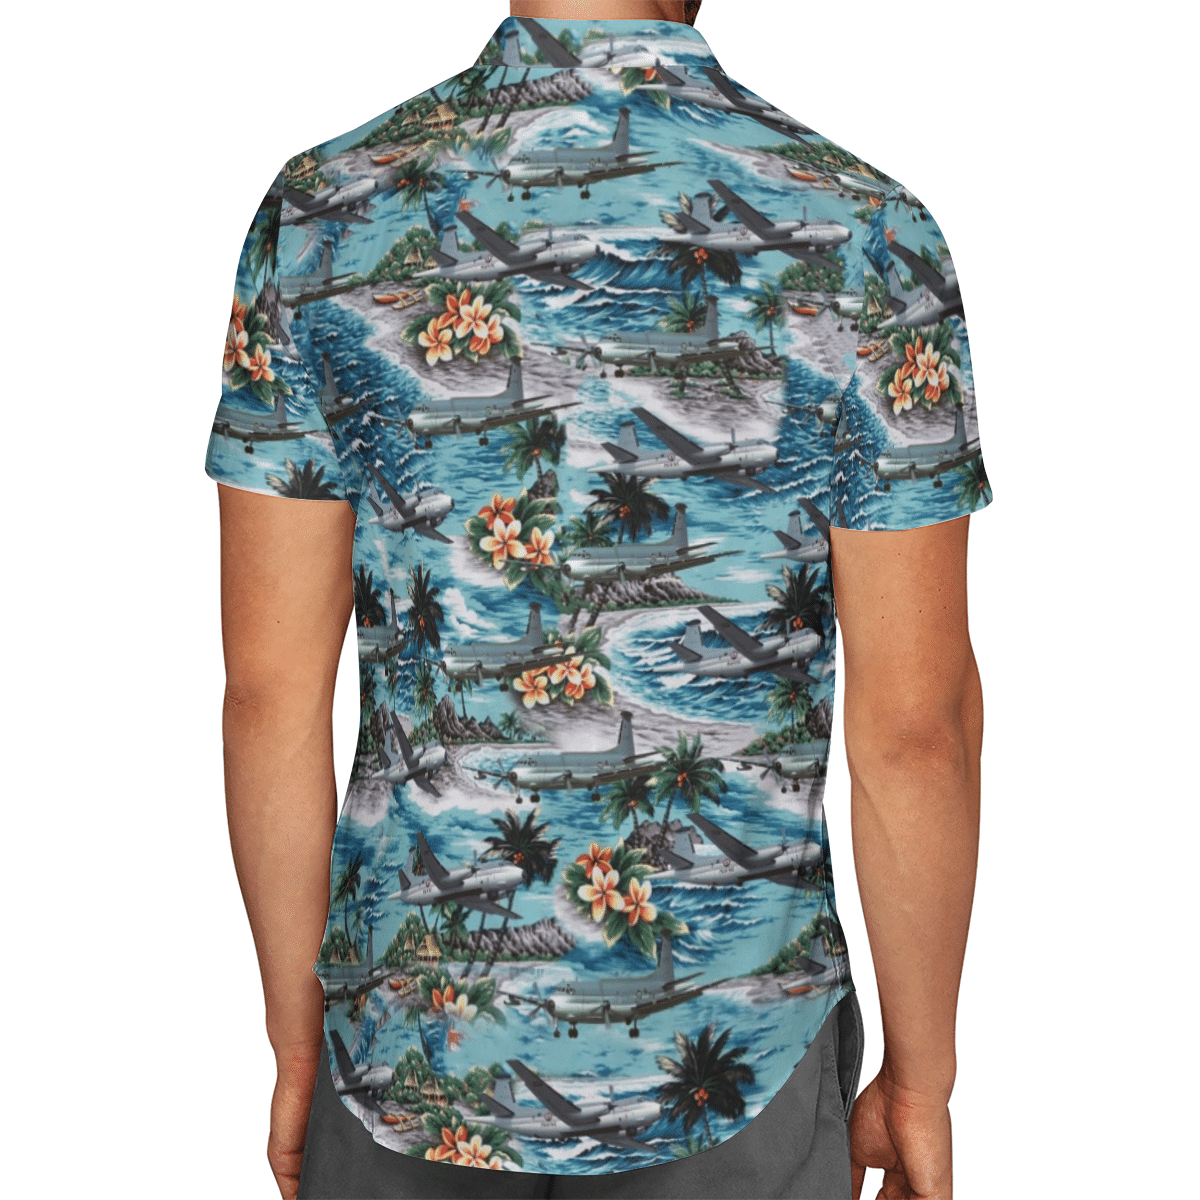 Going to the beach with a quality shirt 194